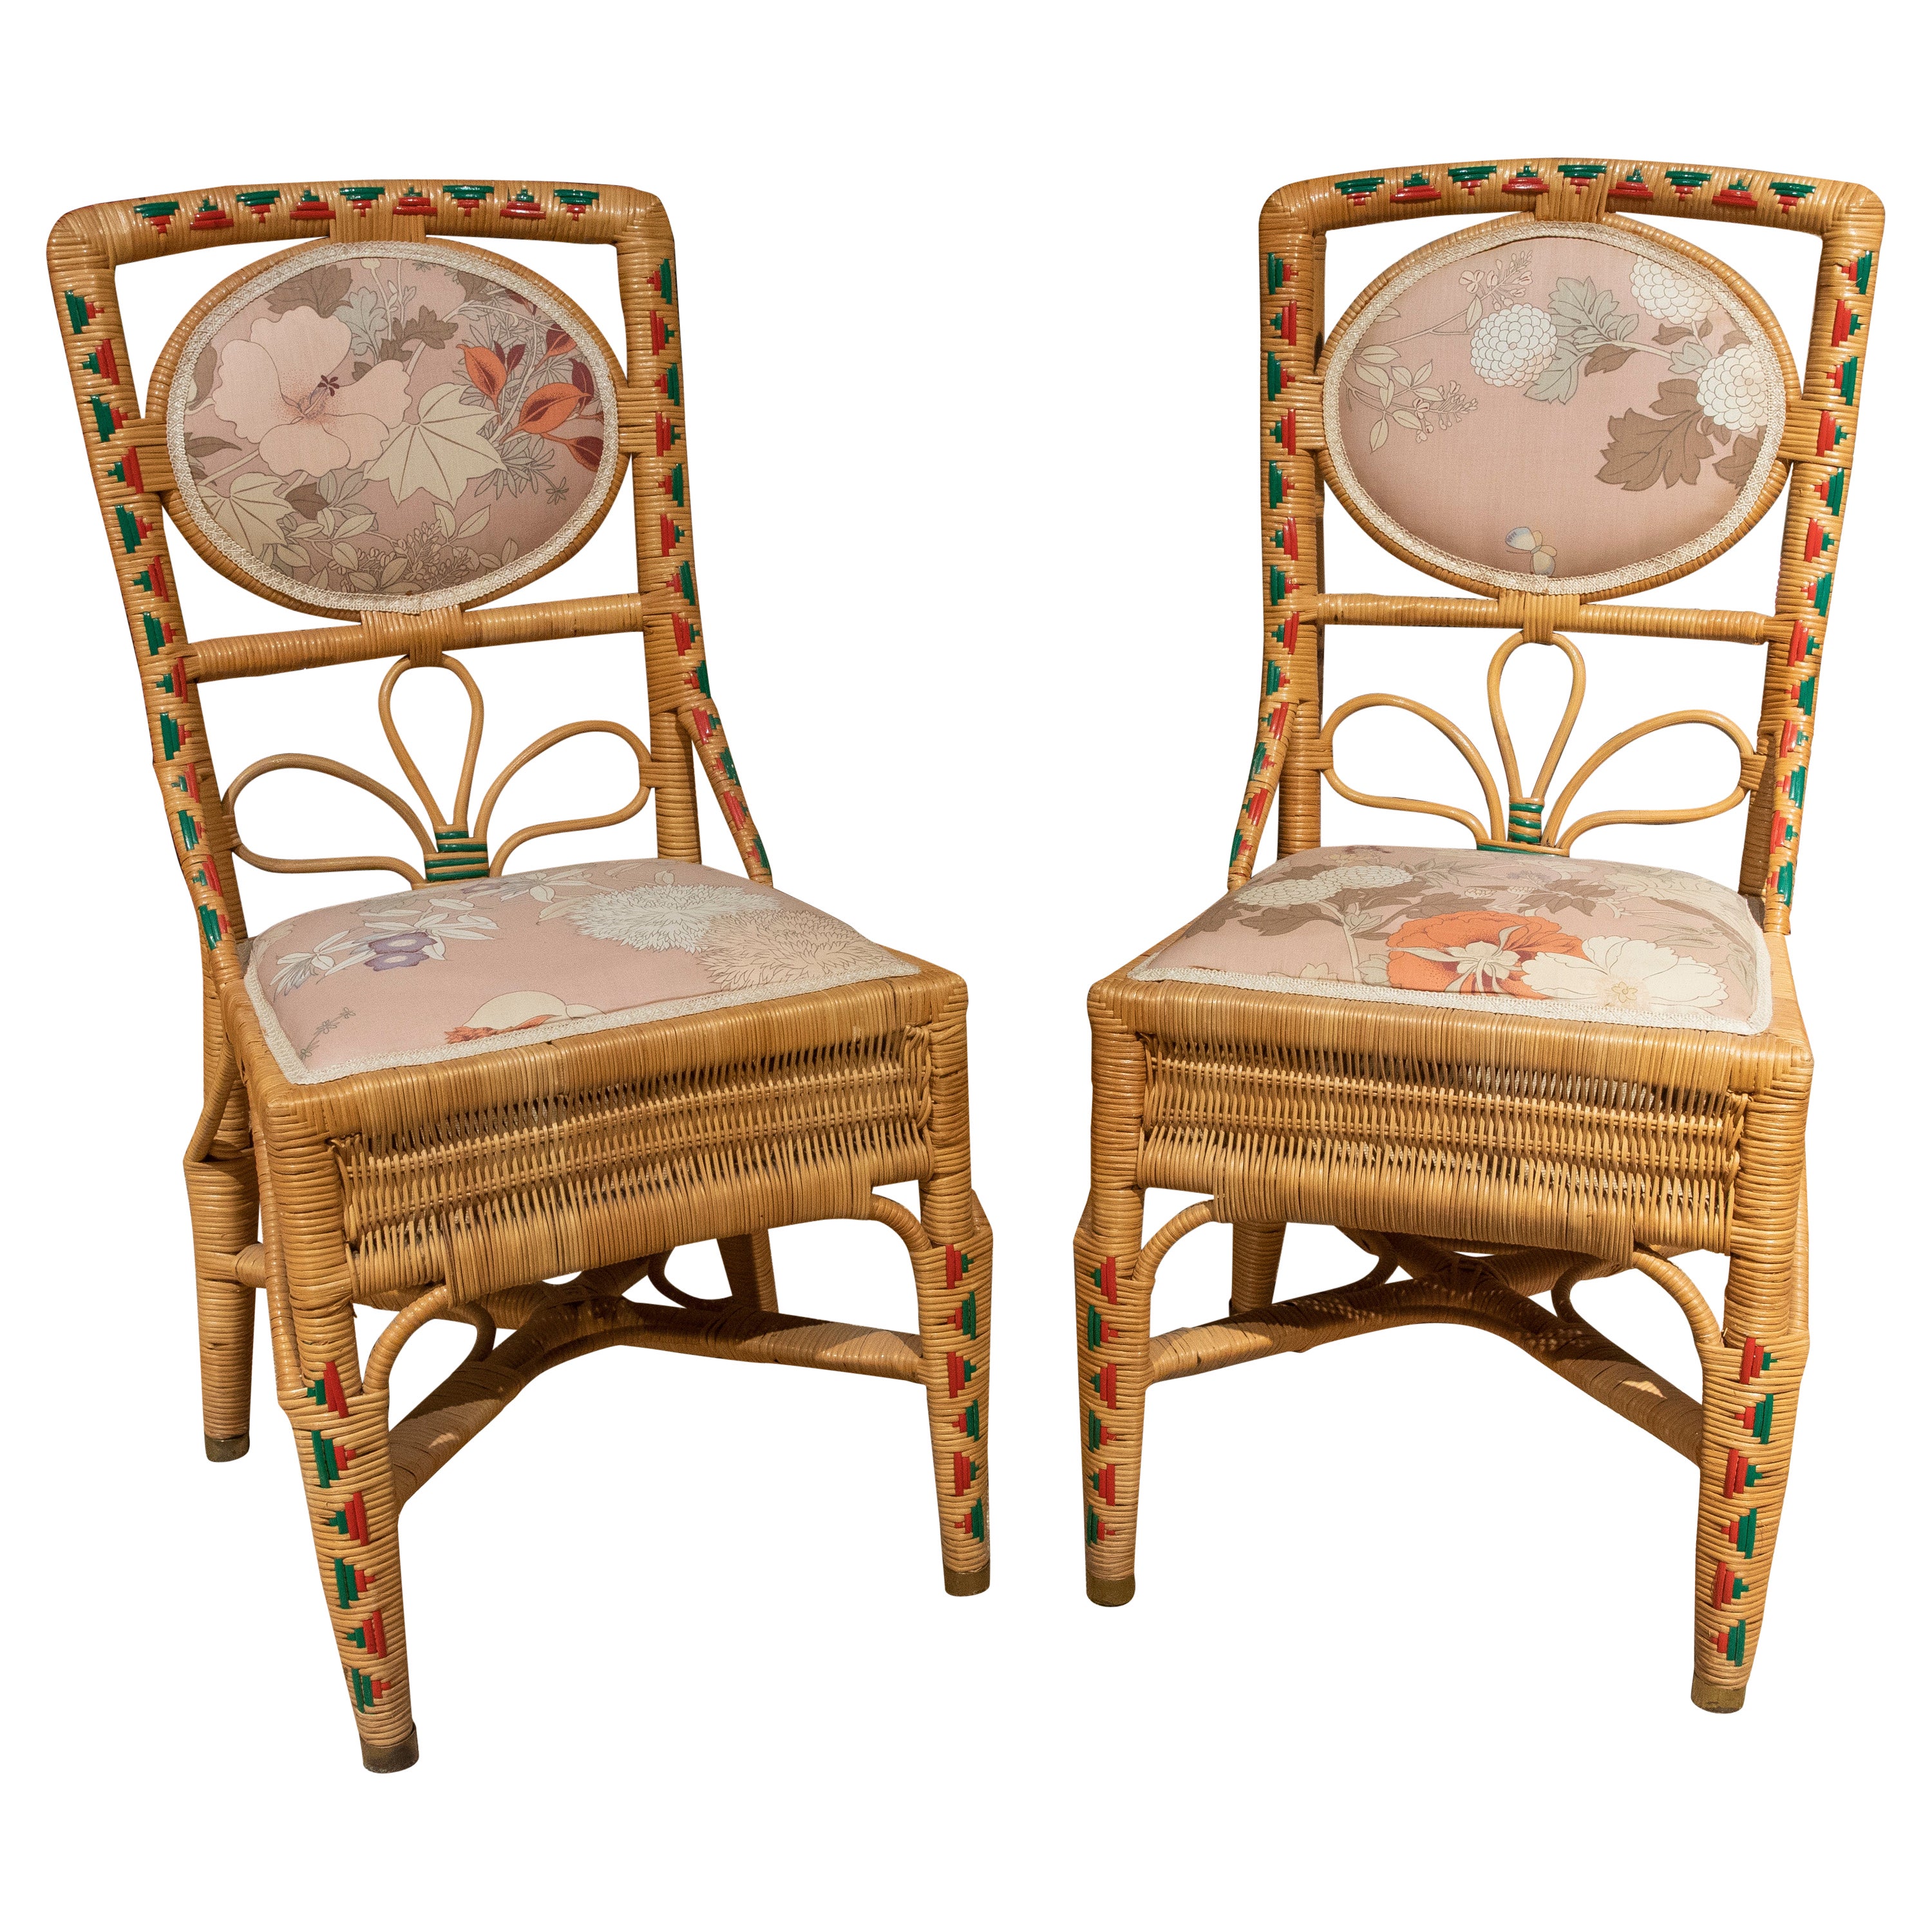 French Pair of Handmade Wicker Chairs with Colorful Decoration